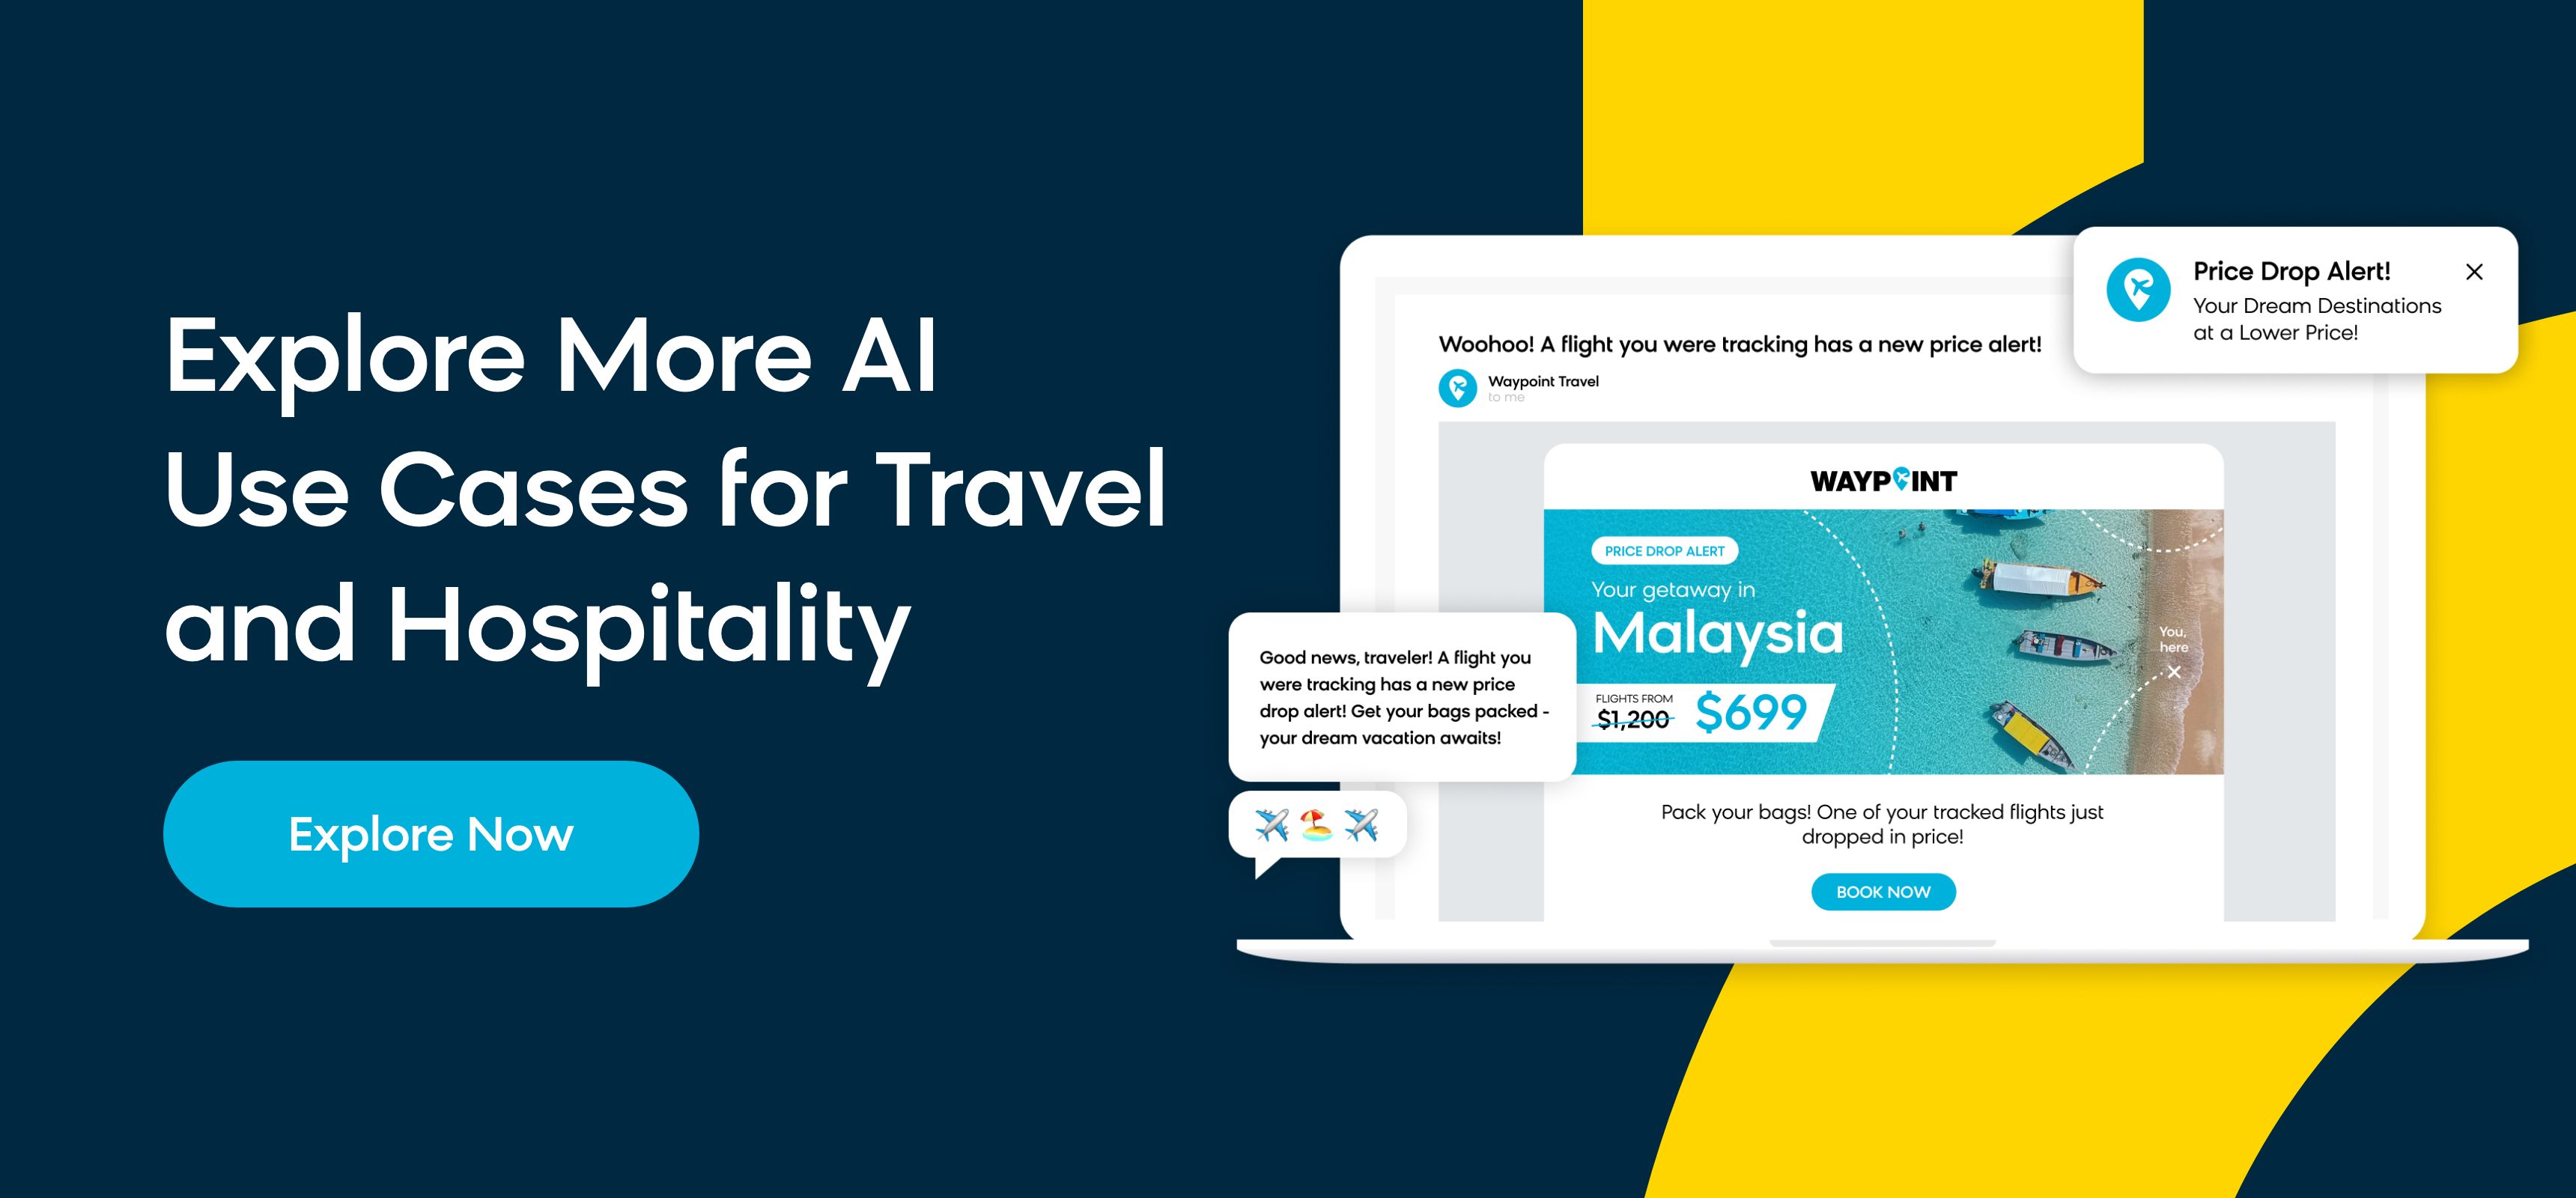 AI travel and hospitality use cases with Bloomreach